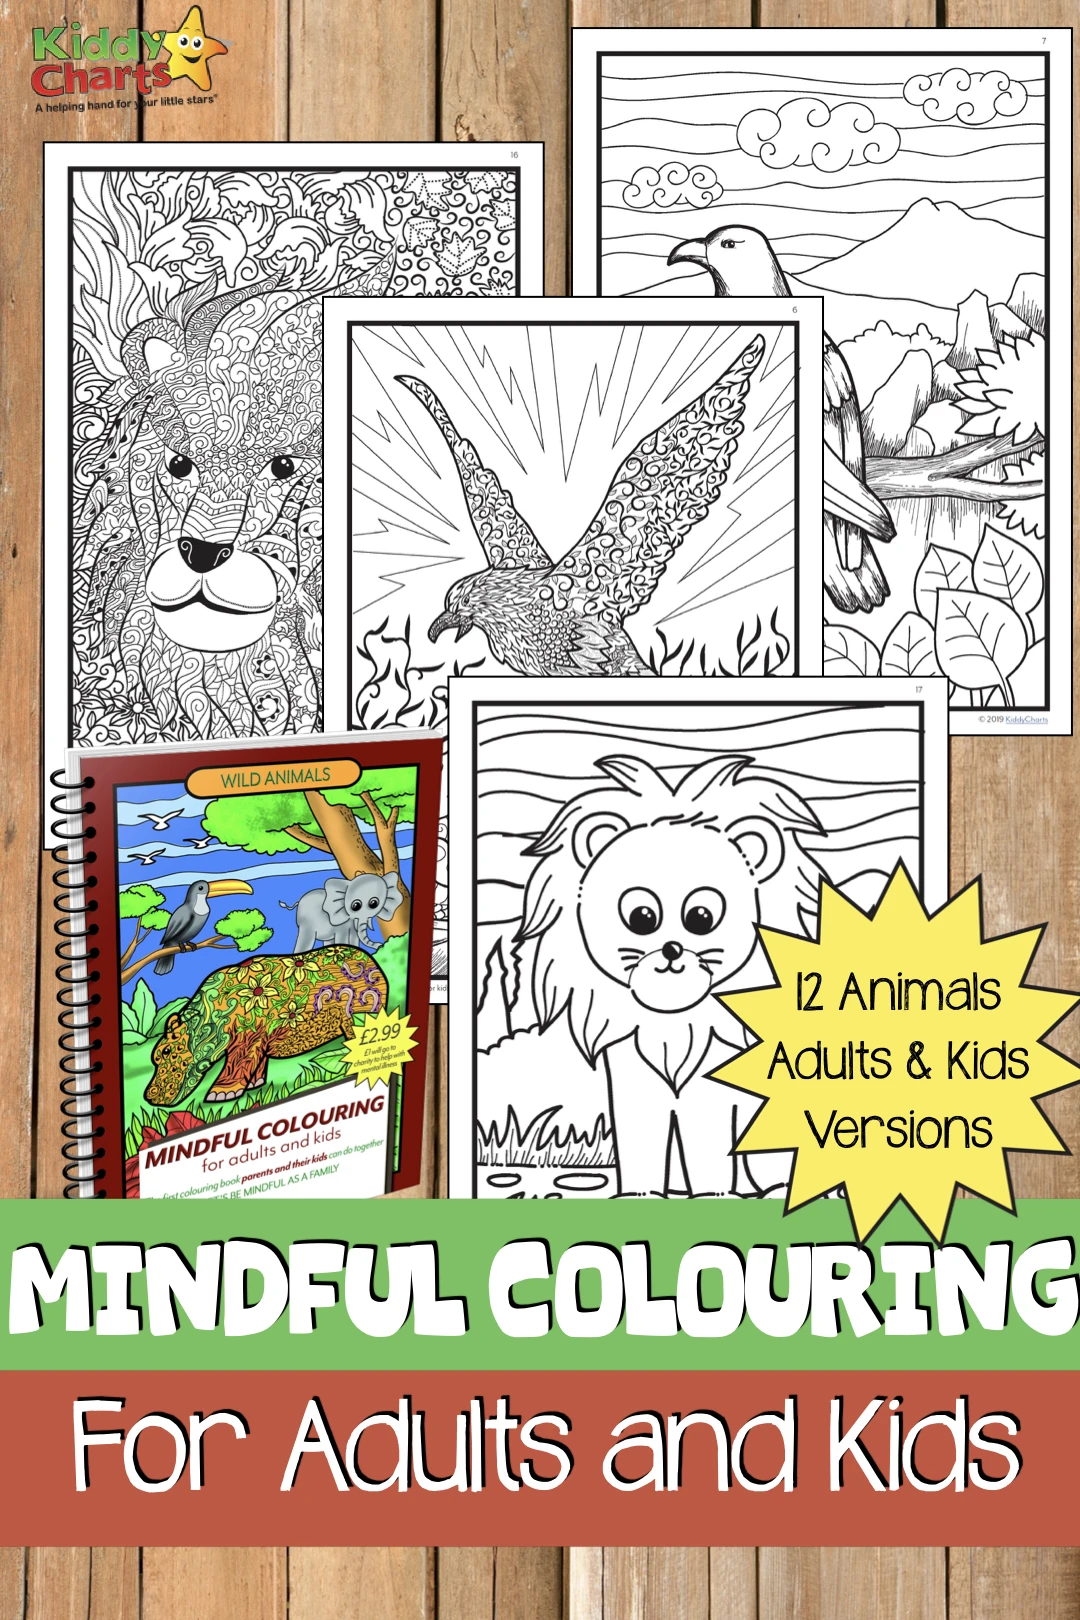 Enjoy 24 pages of colouring fun with our wild animals mindfulness colouring book - all for the price of a coffee. £1 of which goes to Rethink, the mental health charity.